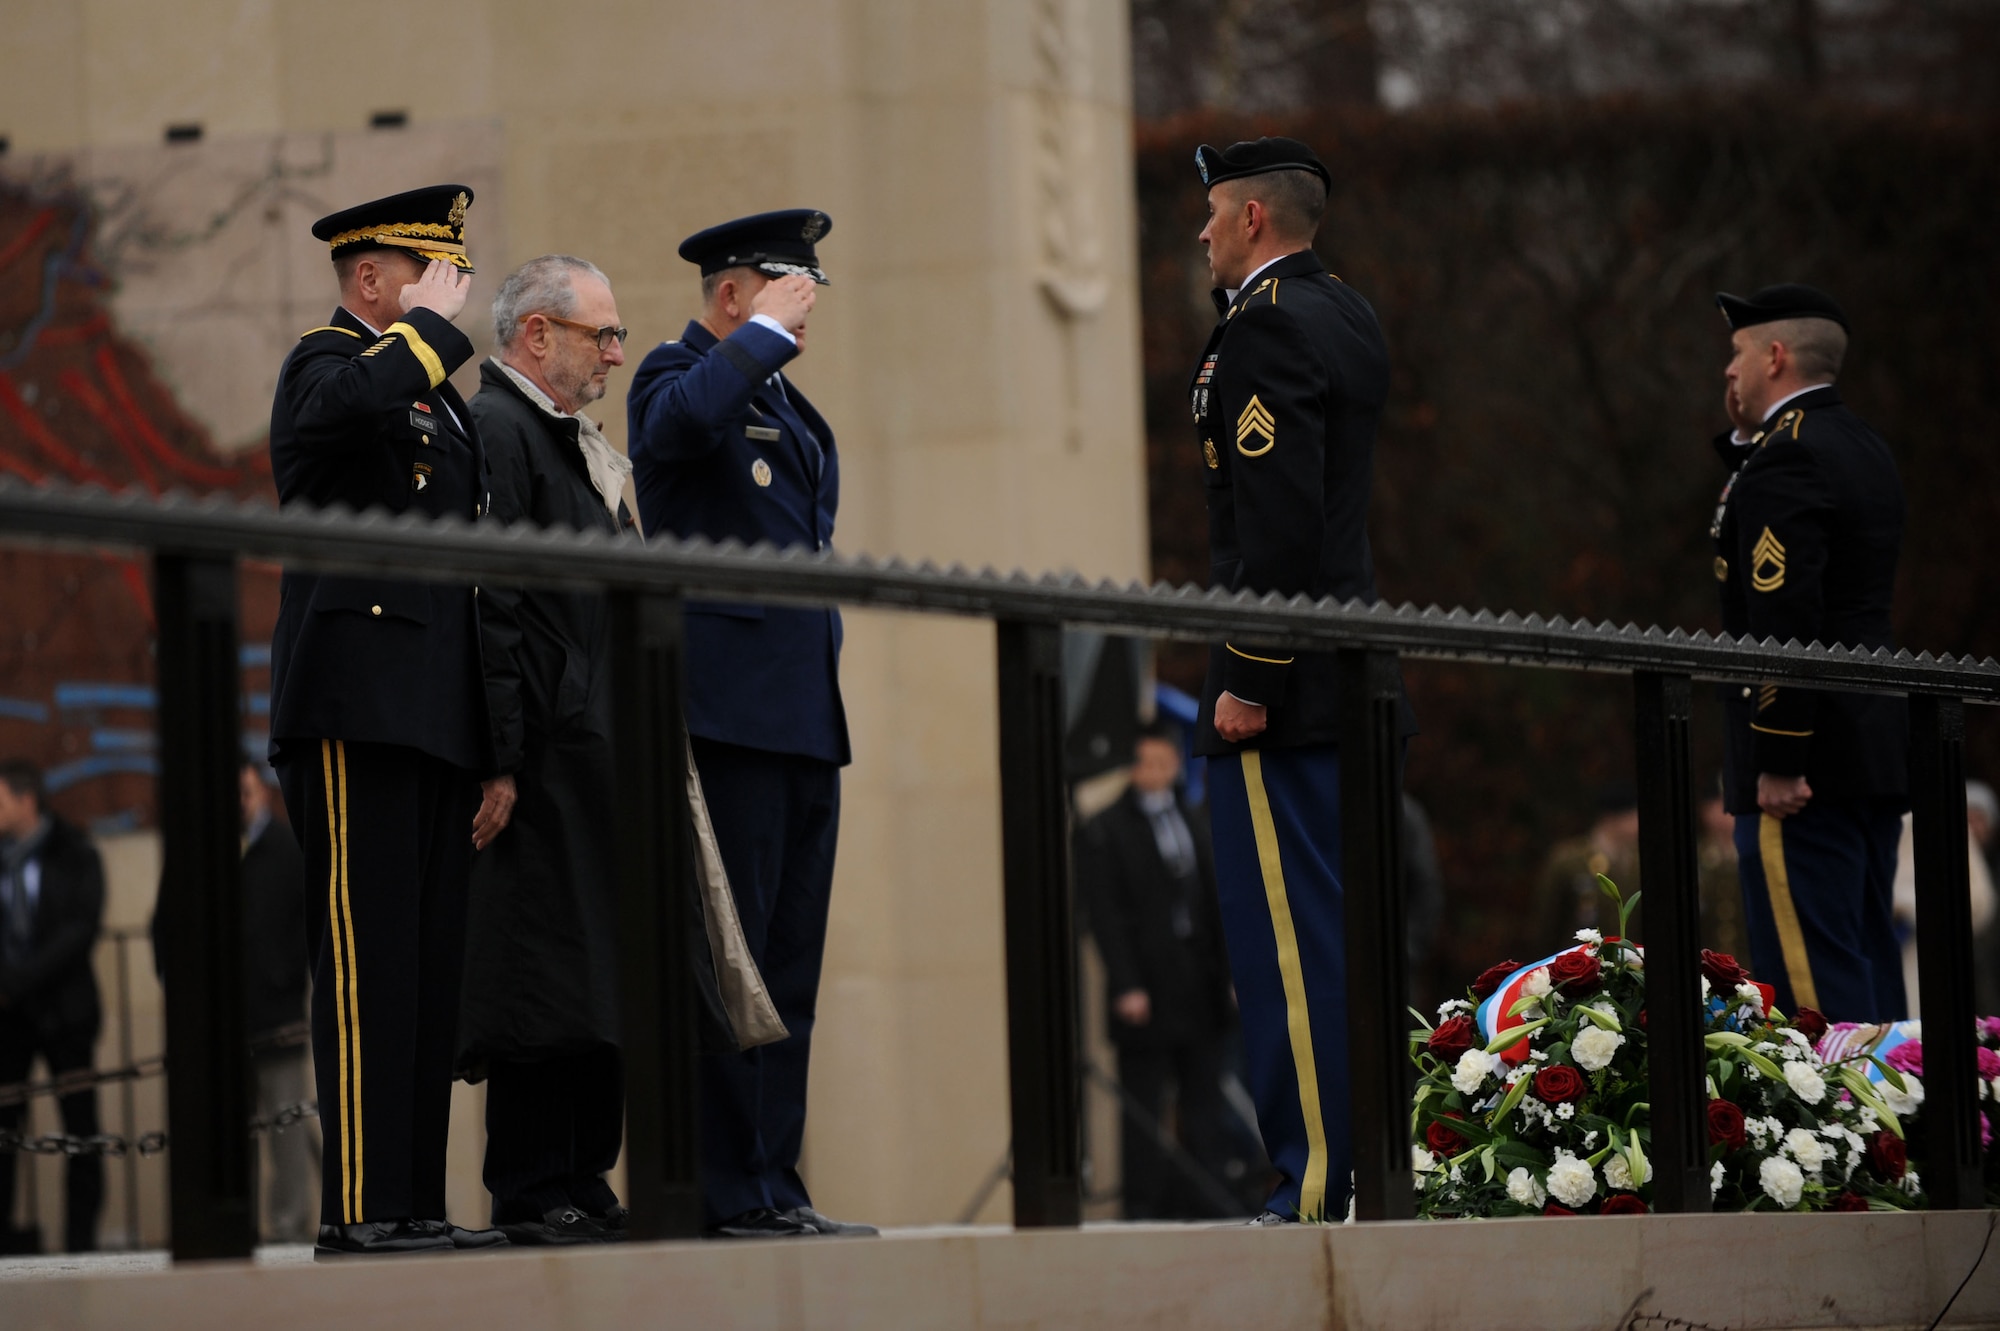 U.S. Army Lt. Gen. Ben Hodges, U.S. Army Europe commander, left; Robert Mandell, U.S. Ambassador to Luxembourg, center; and U.S. Air Force Gen. Frank Gorenc, U. S. Air Forces in Europe and Air Forces Africa commander, right, salute a wreath during the 70th Anniversary of the Battle of the Bulge at the Luxembourg American Military Cemetery in Luxembourg, Dec. 16, 2014. The government of Luxembourg and the U.S. Embassy held the memorial in honor of the veterans and fallen service members of the Battle of the Bulge. (U.S. Air Force photo by Airman 1st Class Timothy Kim/Released)